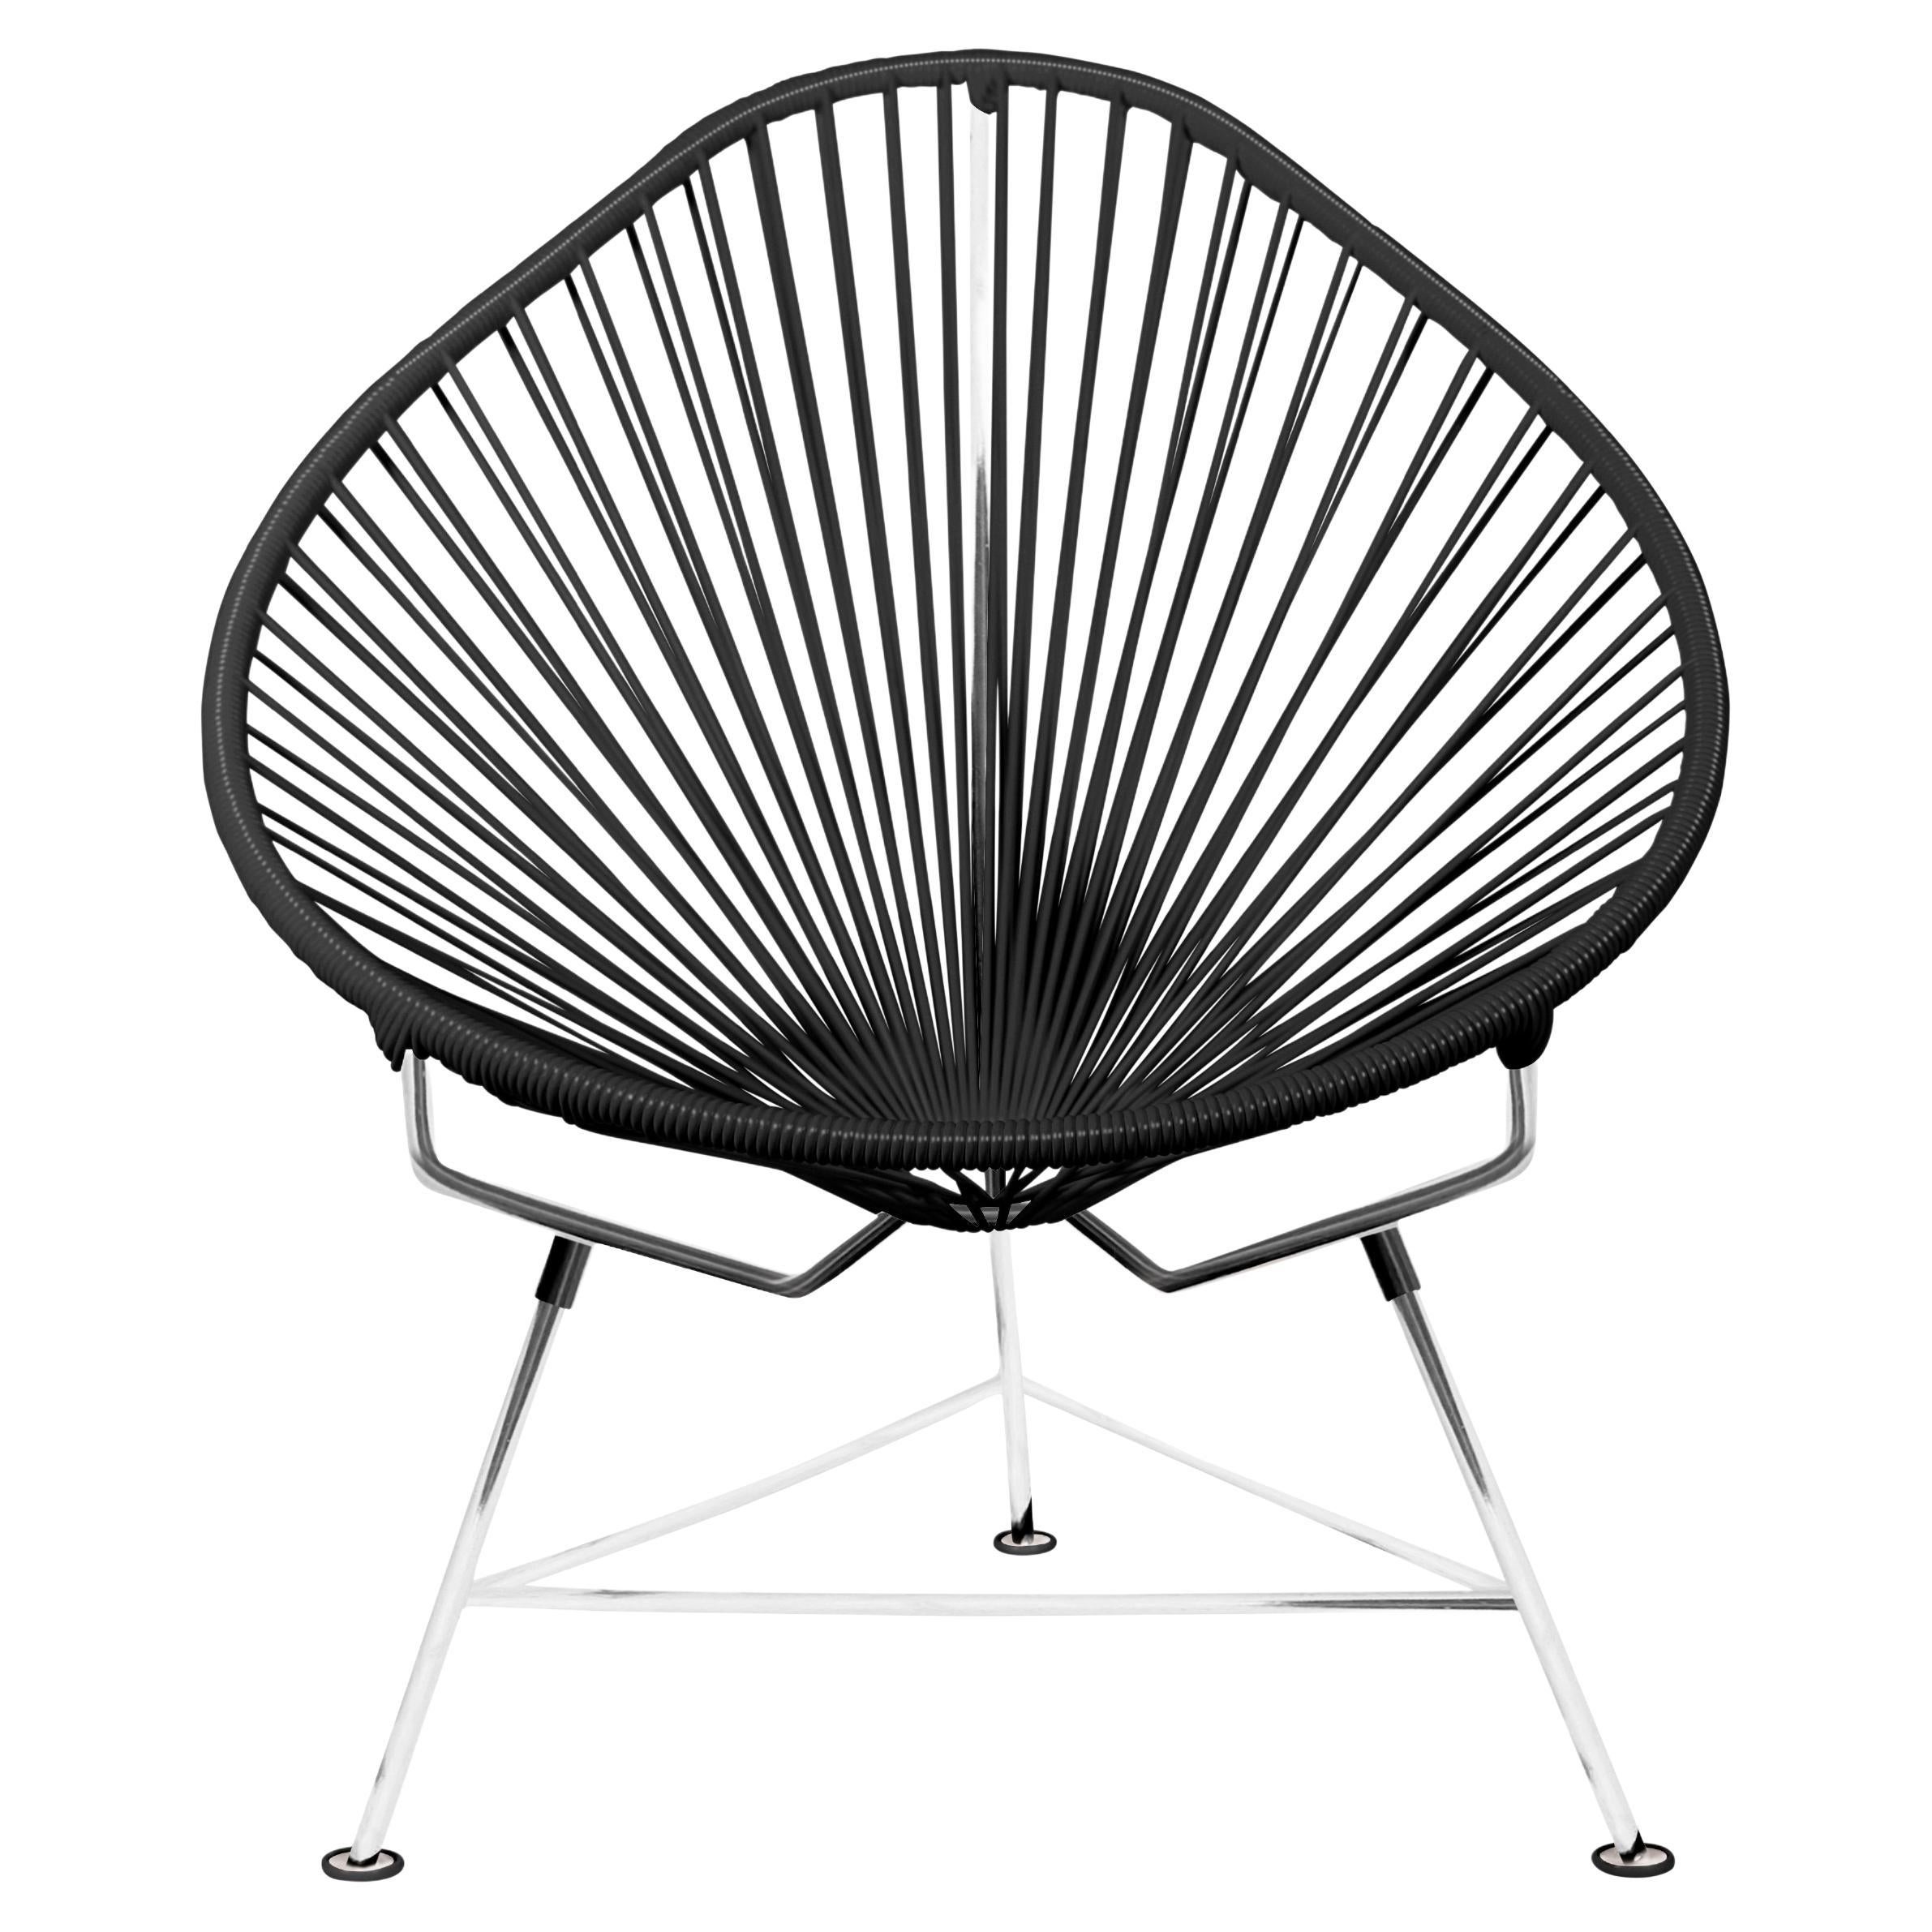 Innit Designs Acapulco Chair Black Weave on Chrome Frame For Sale